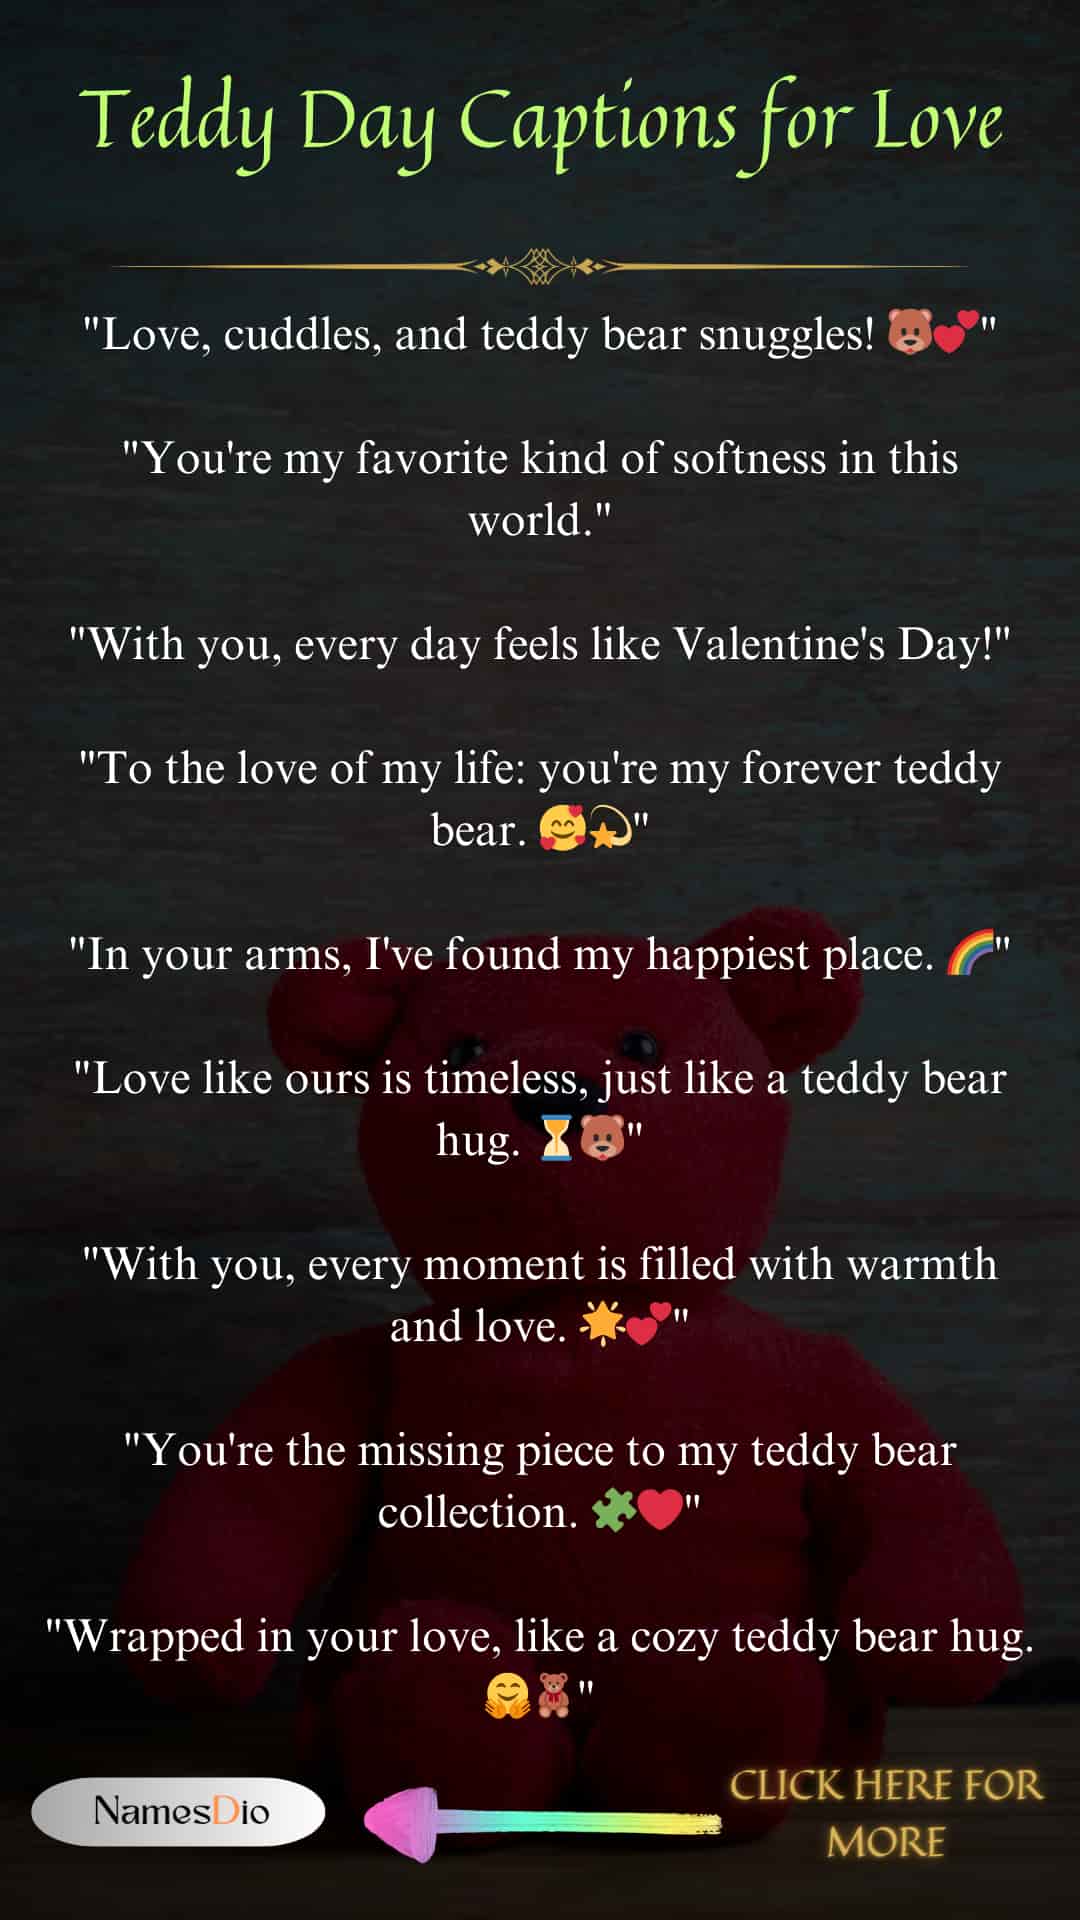 Teddy-Day-Captions-for-Love